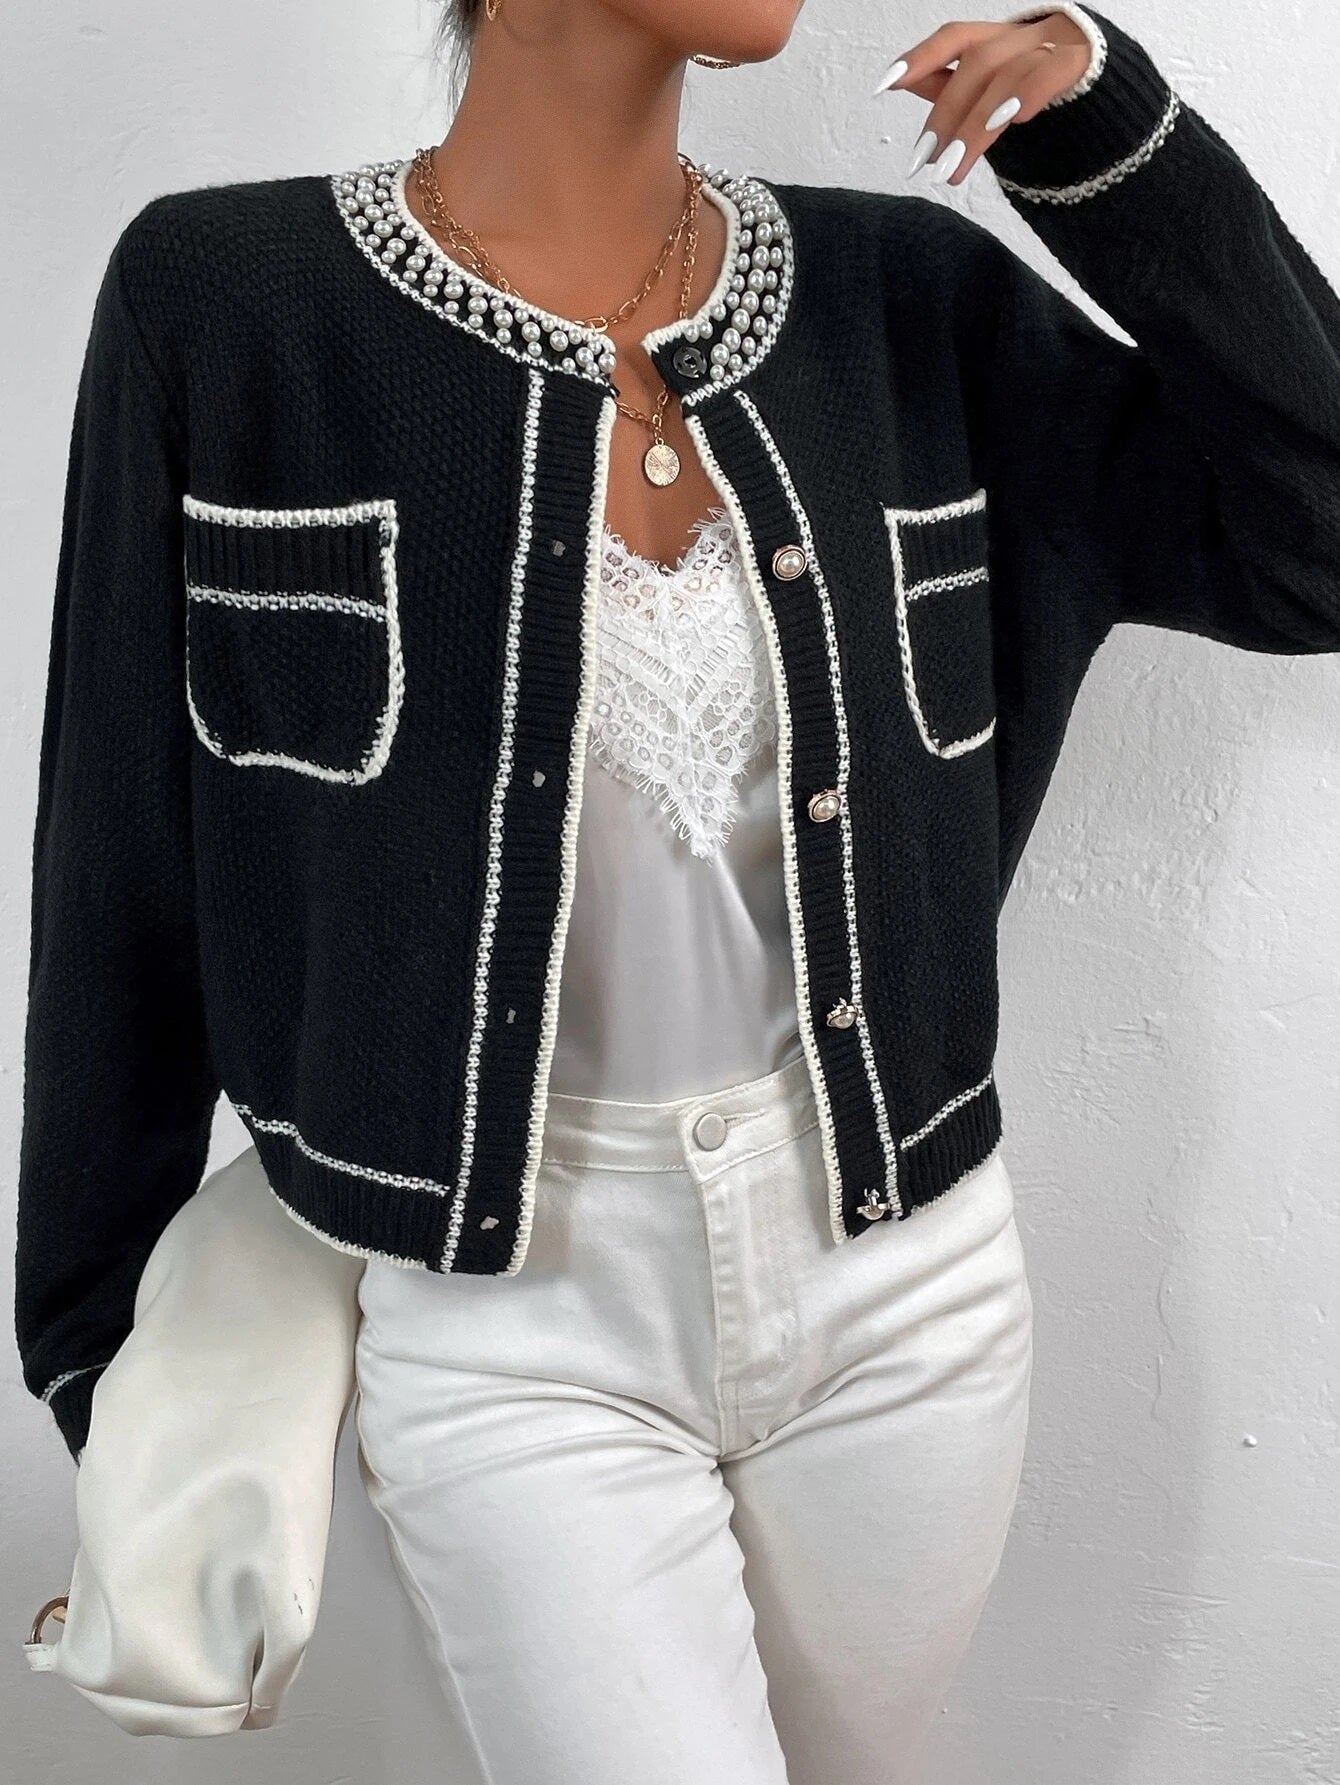 CM-CS226247 Women Casual Seoul Style Pearl Beaded Pocket Patched Cardigan - Black